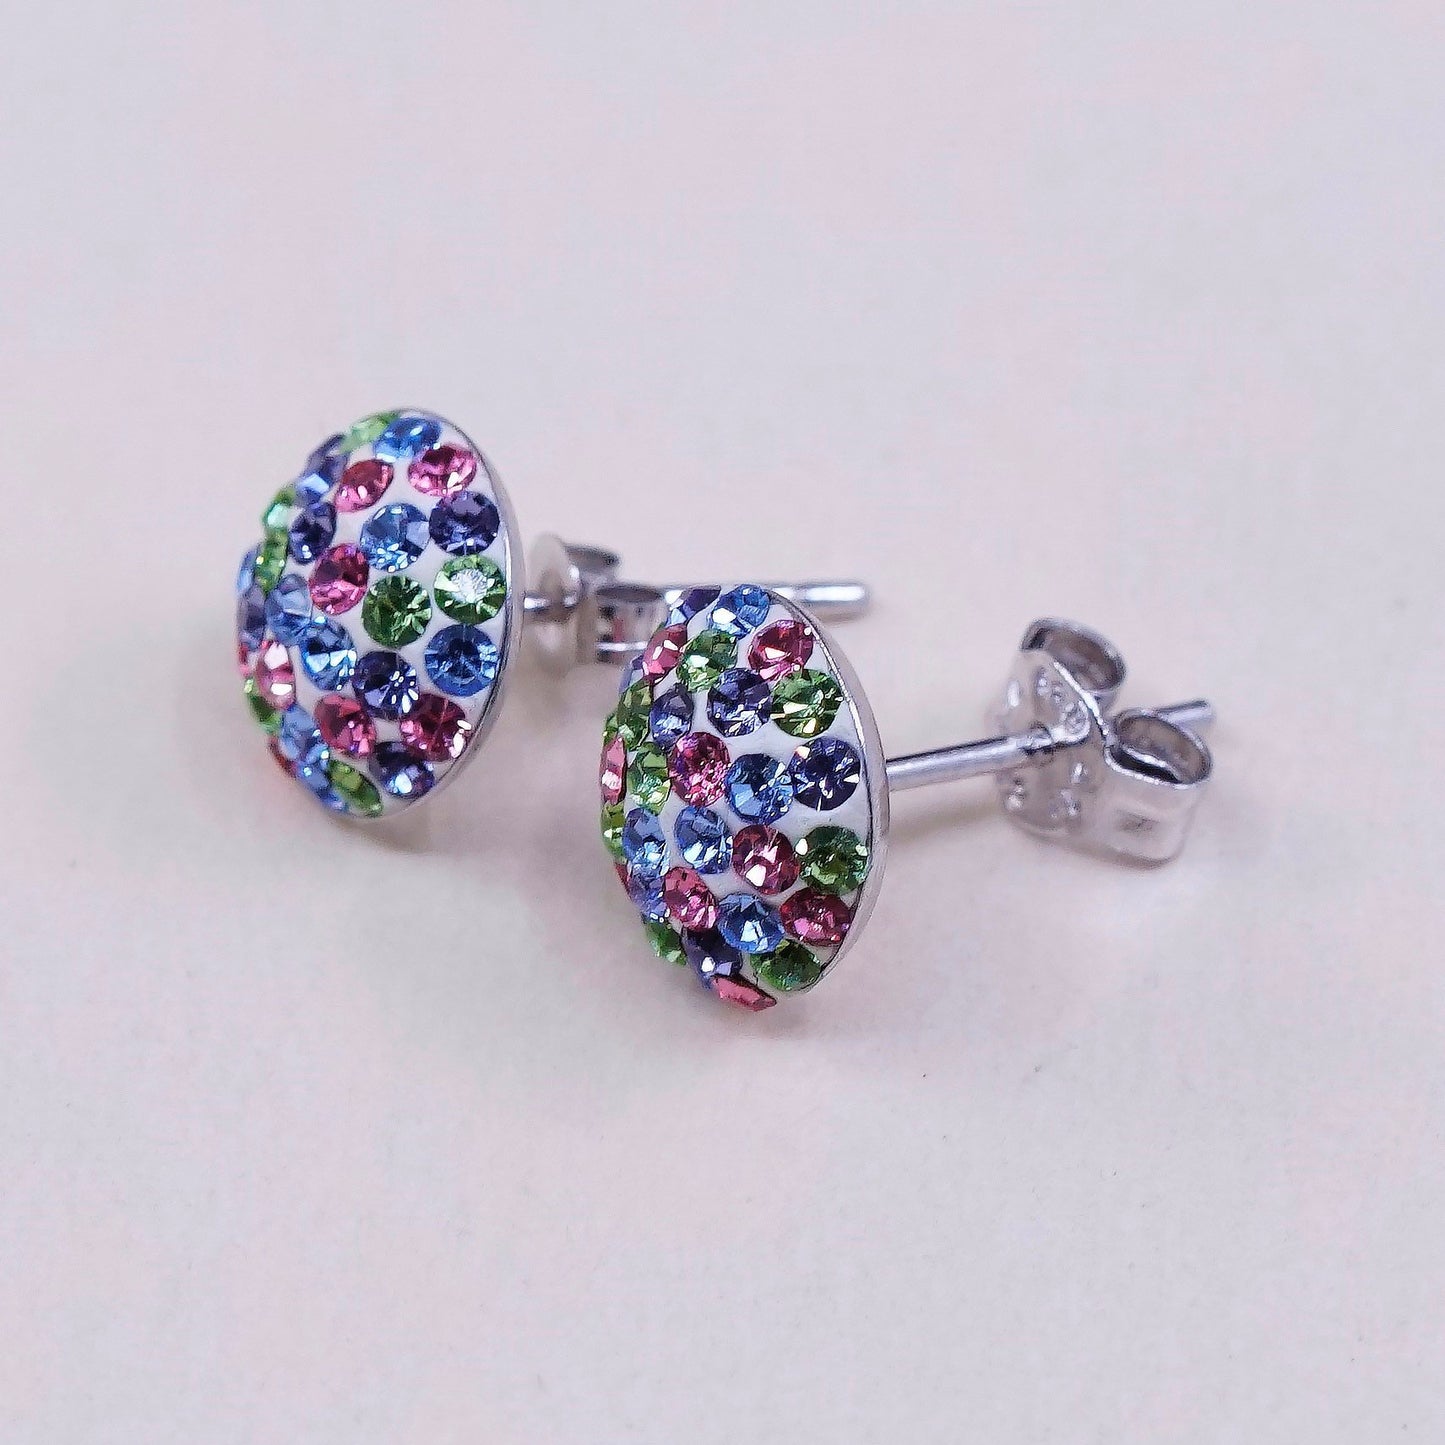 vtg sterling silver handmade earrings, 925 round studs w/ colorful cluster cz